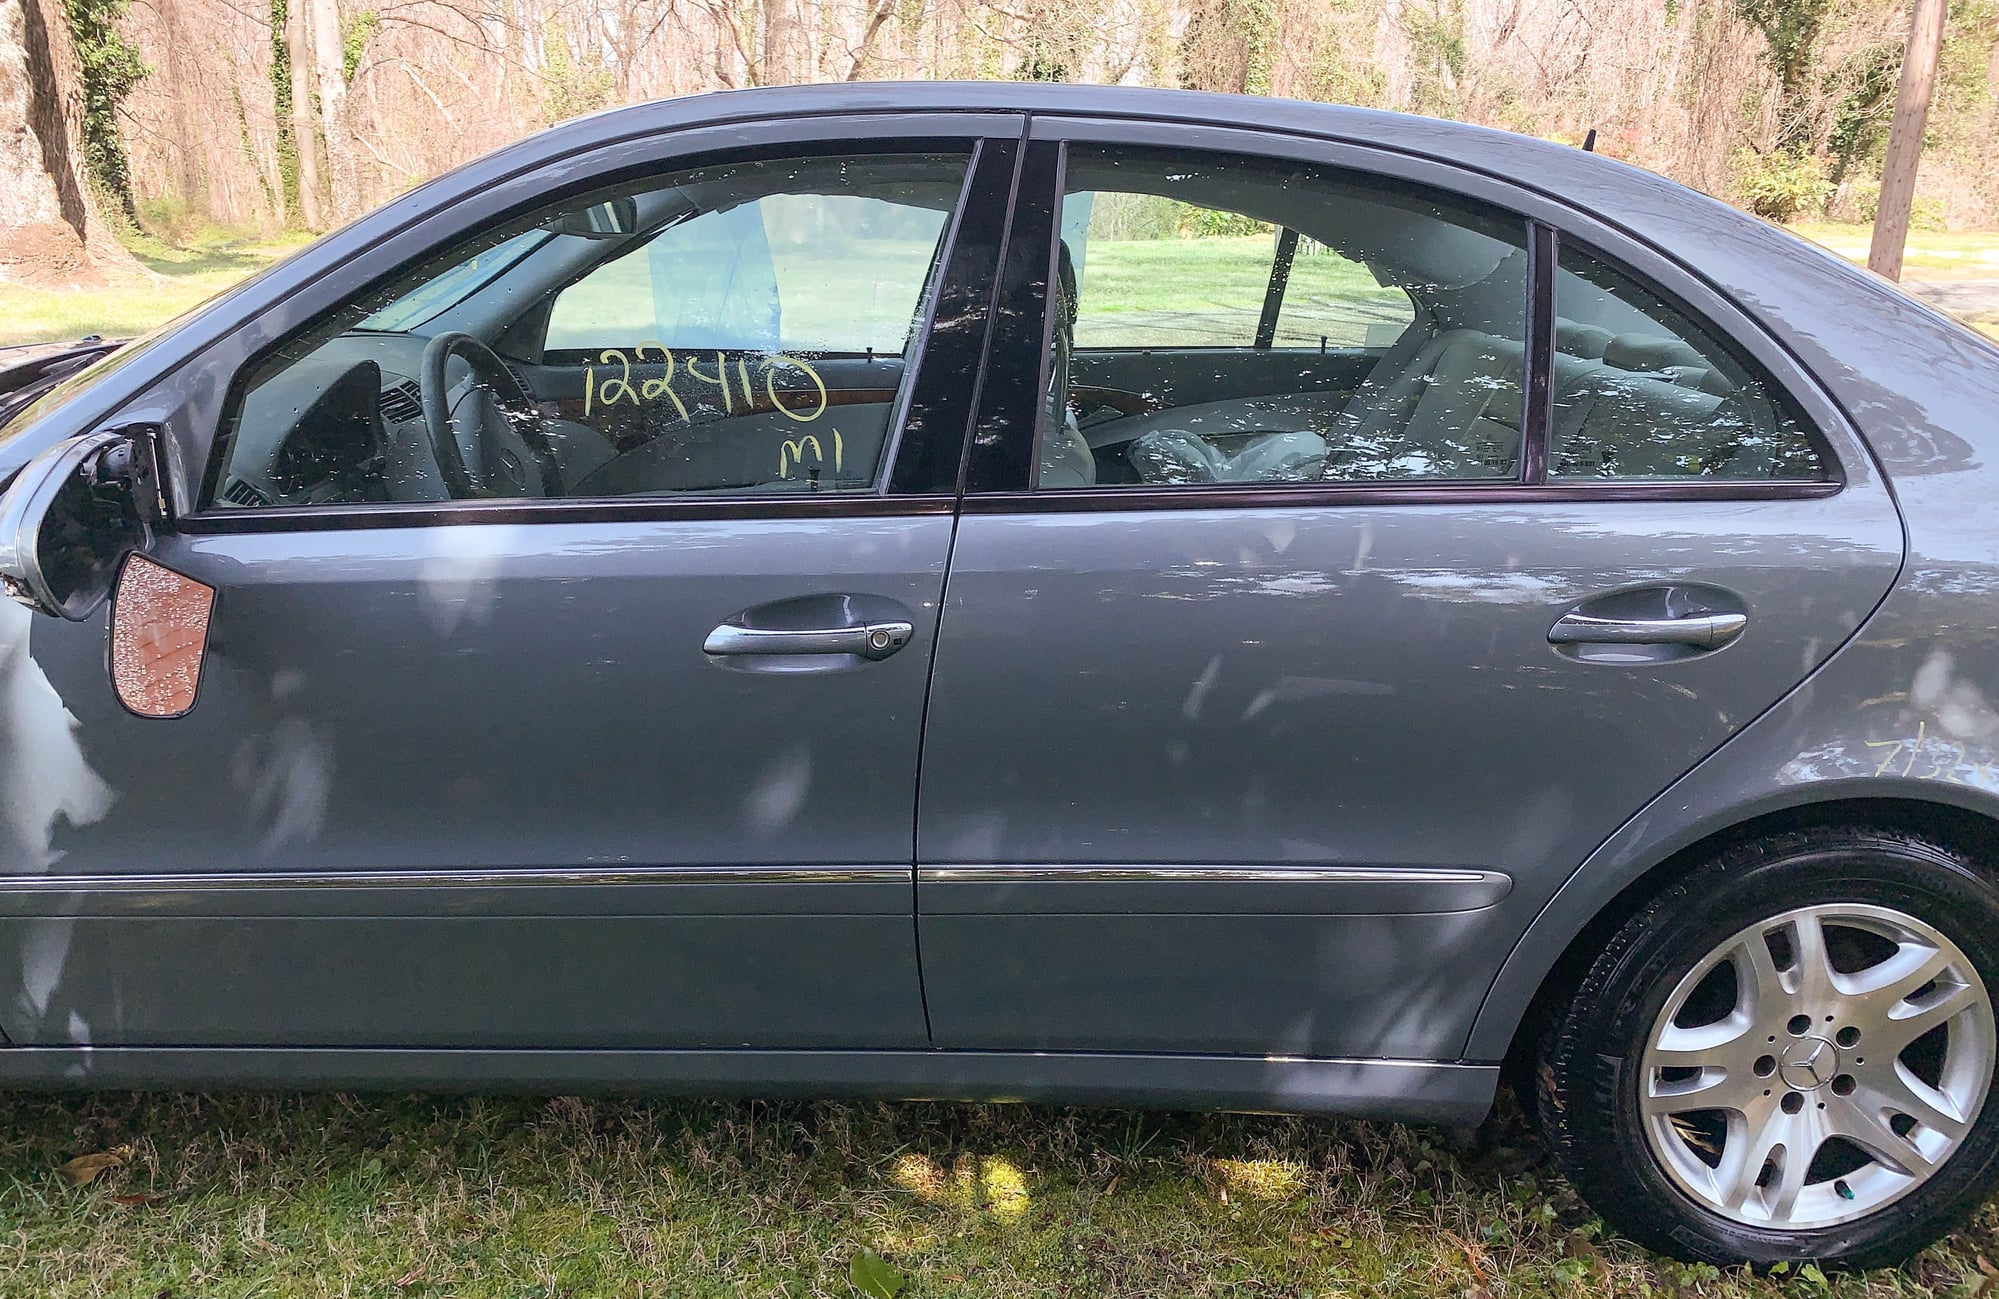 2005 Mercedes-Benz E320 - Low miles E320 CDI runs well, but wrecked. - Used - VIN wdbuf26j95a769723 - 122,409 Miles - 6 cyl - 2WD - Automatic - Sedan - Gray - Richmond, VA 23227, United States